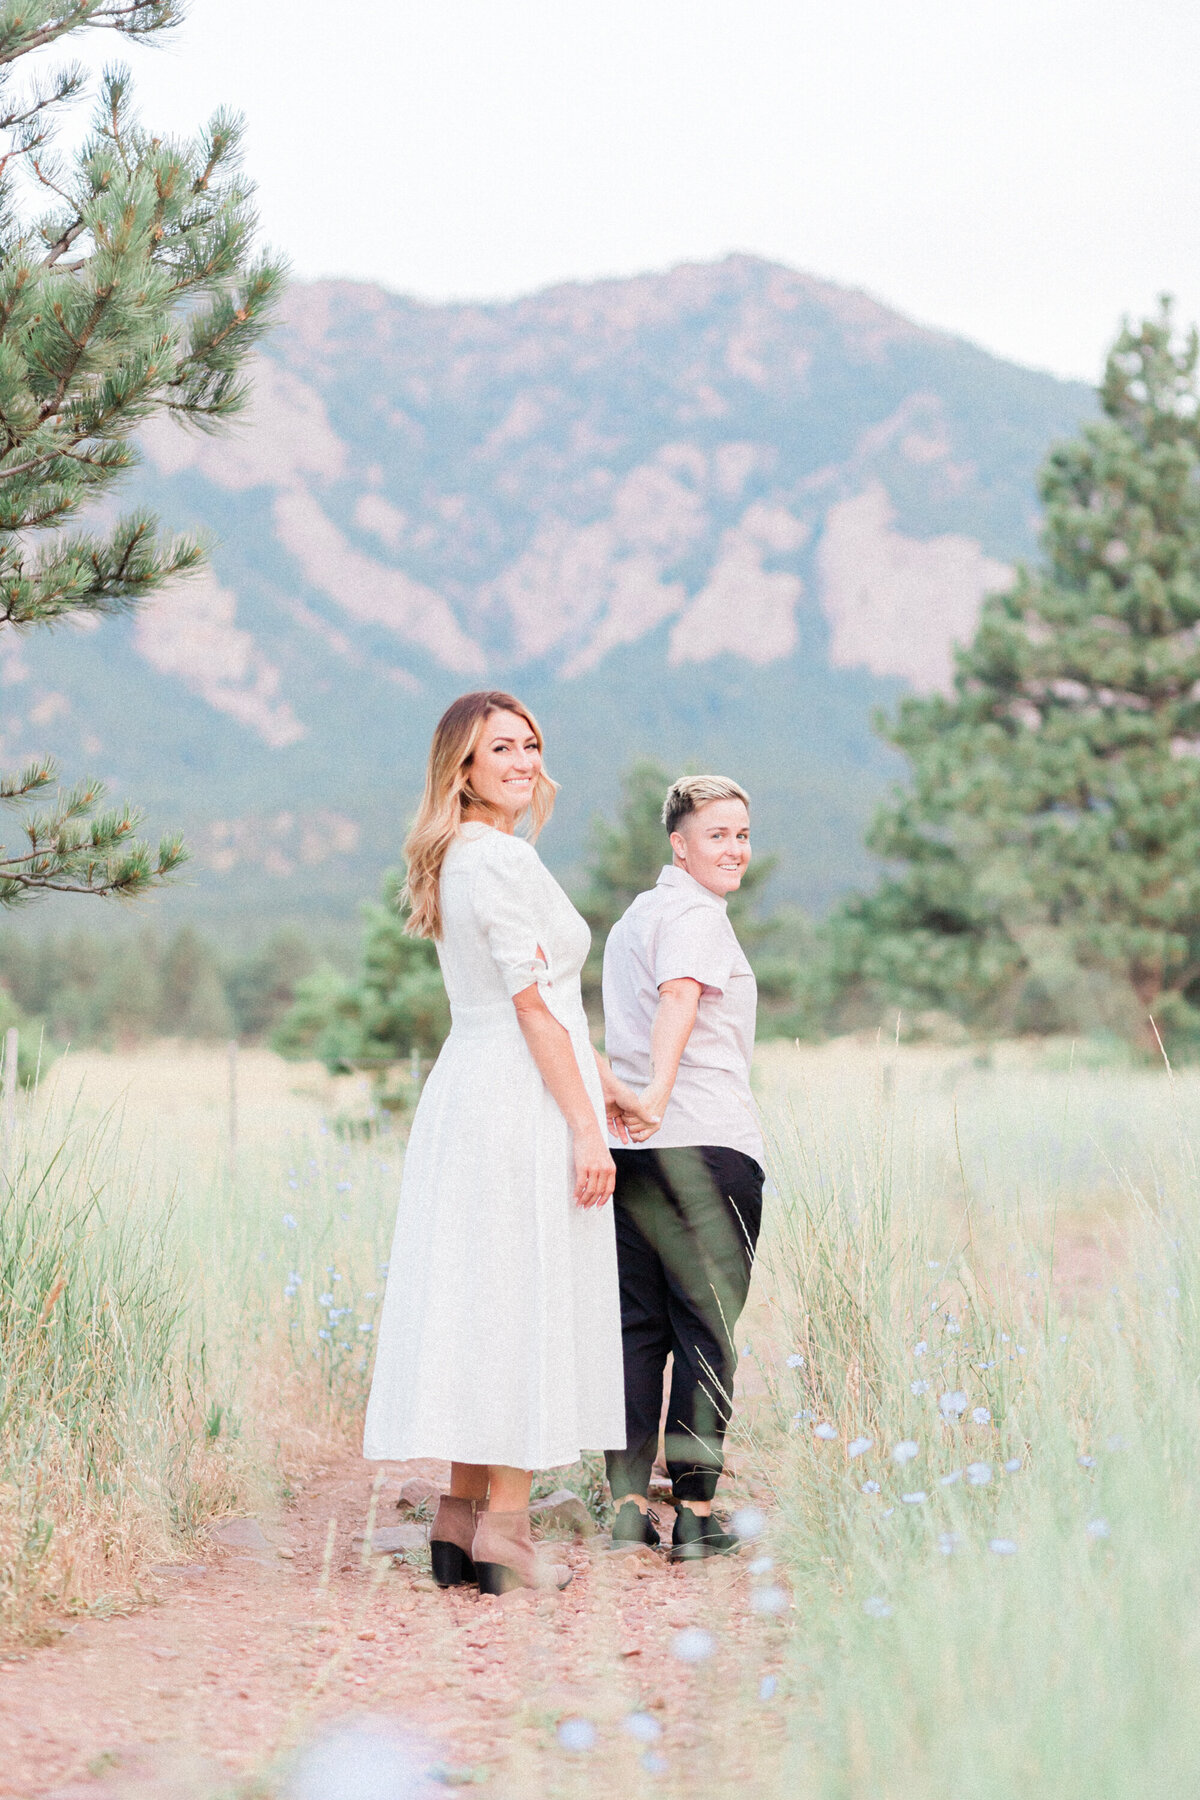 Sunrise_Engagement_Session_Boulder_Coulter_Lgbtq_by_Colorado_Wedding_Photographer_Diana_Coulter-12